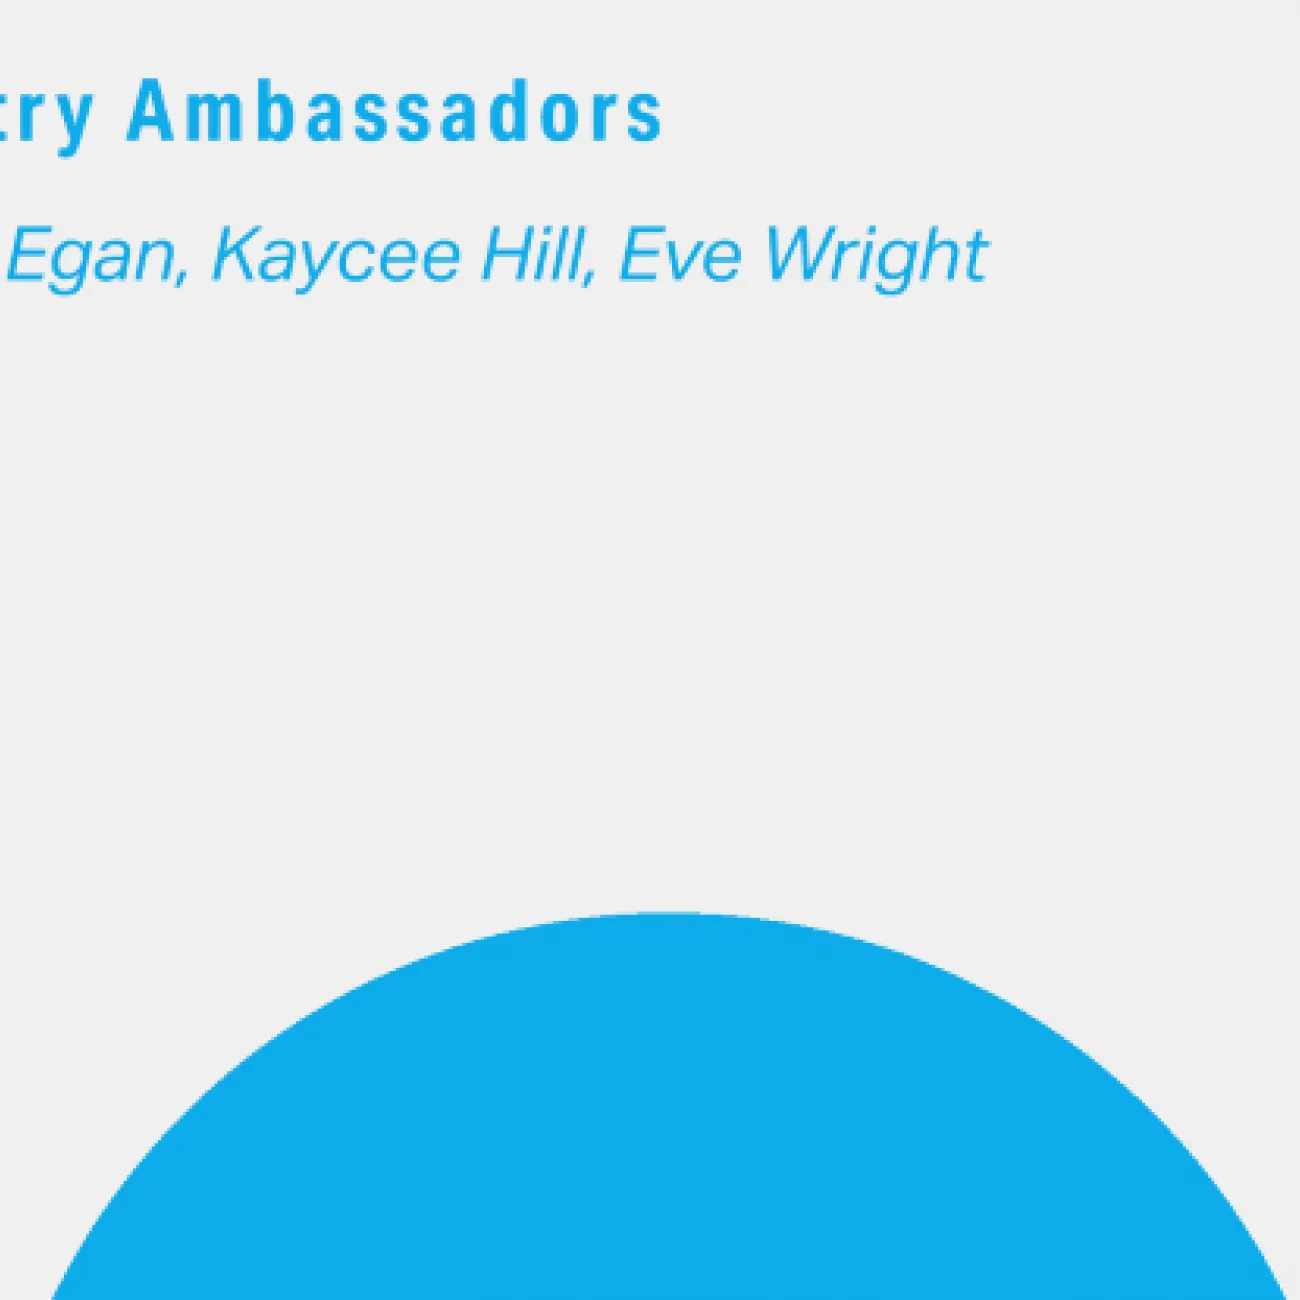 A section of the front cover of the Poetry Ambassadors book, an anthology by young poets April Egan, Kaycee Hill and Eve Wright